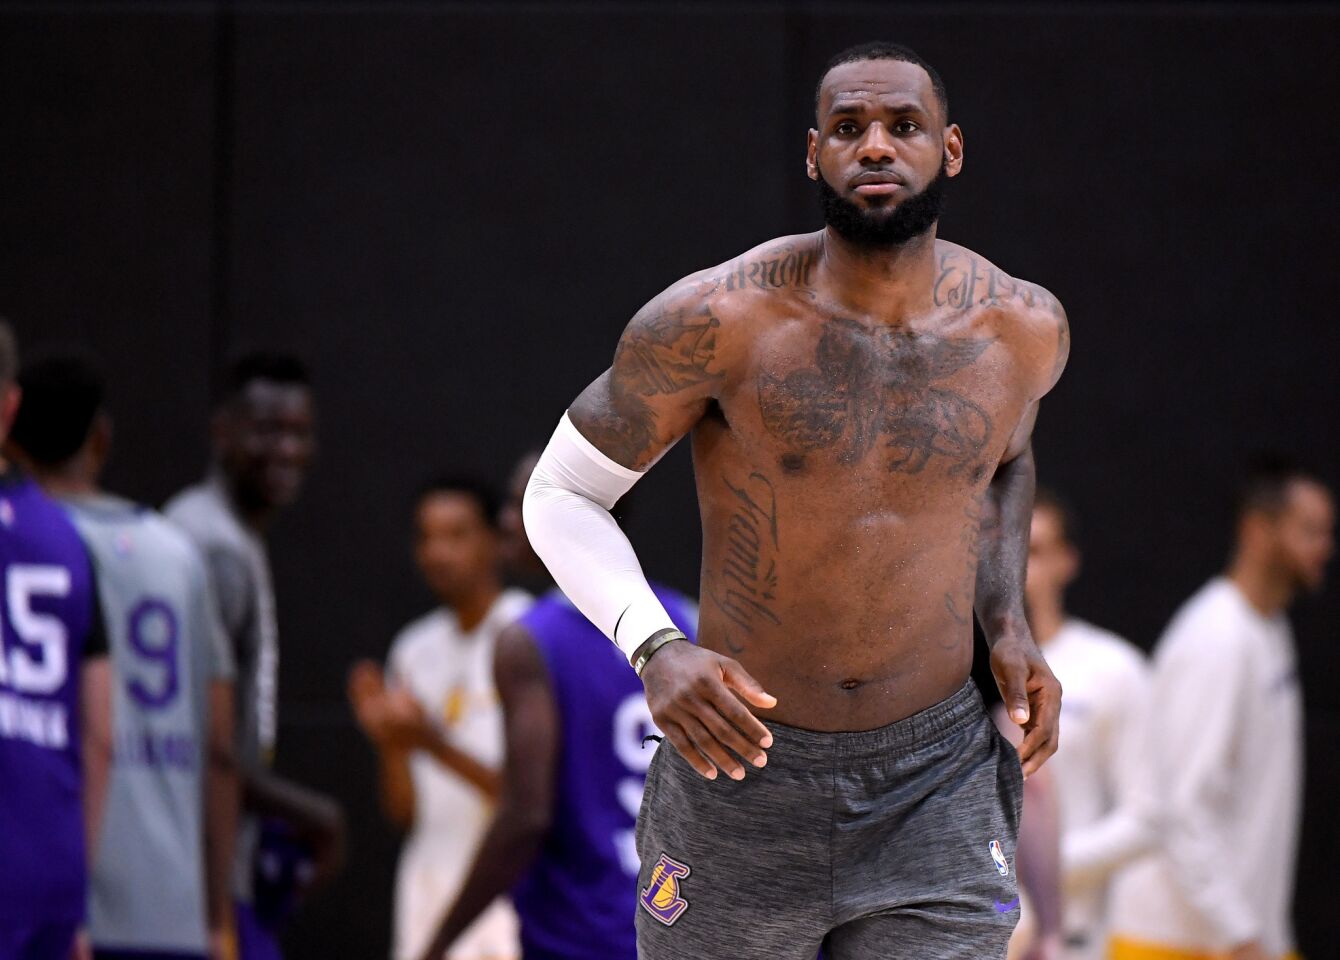 EL SEGUNDO, CA - SEPTEMBER 25: LeBron James of the Los Angeles Lakers during a Los Angeles Lakers practice session at the UCLA Health Training Center on September 25, 2018 in El Segundo, California. (Photo by Harry How/Getty Images) ** OUTS - ELSENT, FPG, CM - OUTS * NM, PH, VA if sourced by CT, LA or MoD **